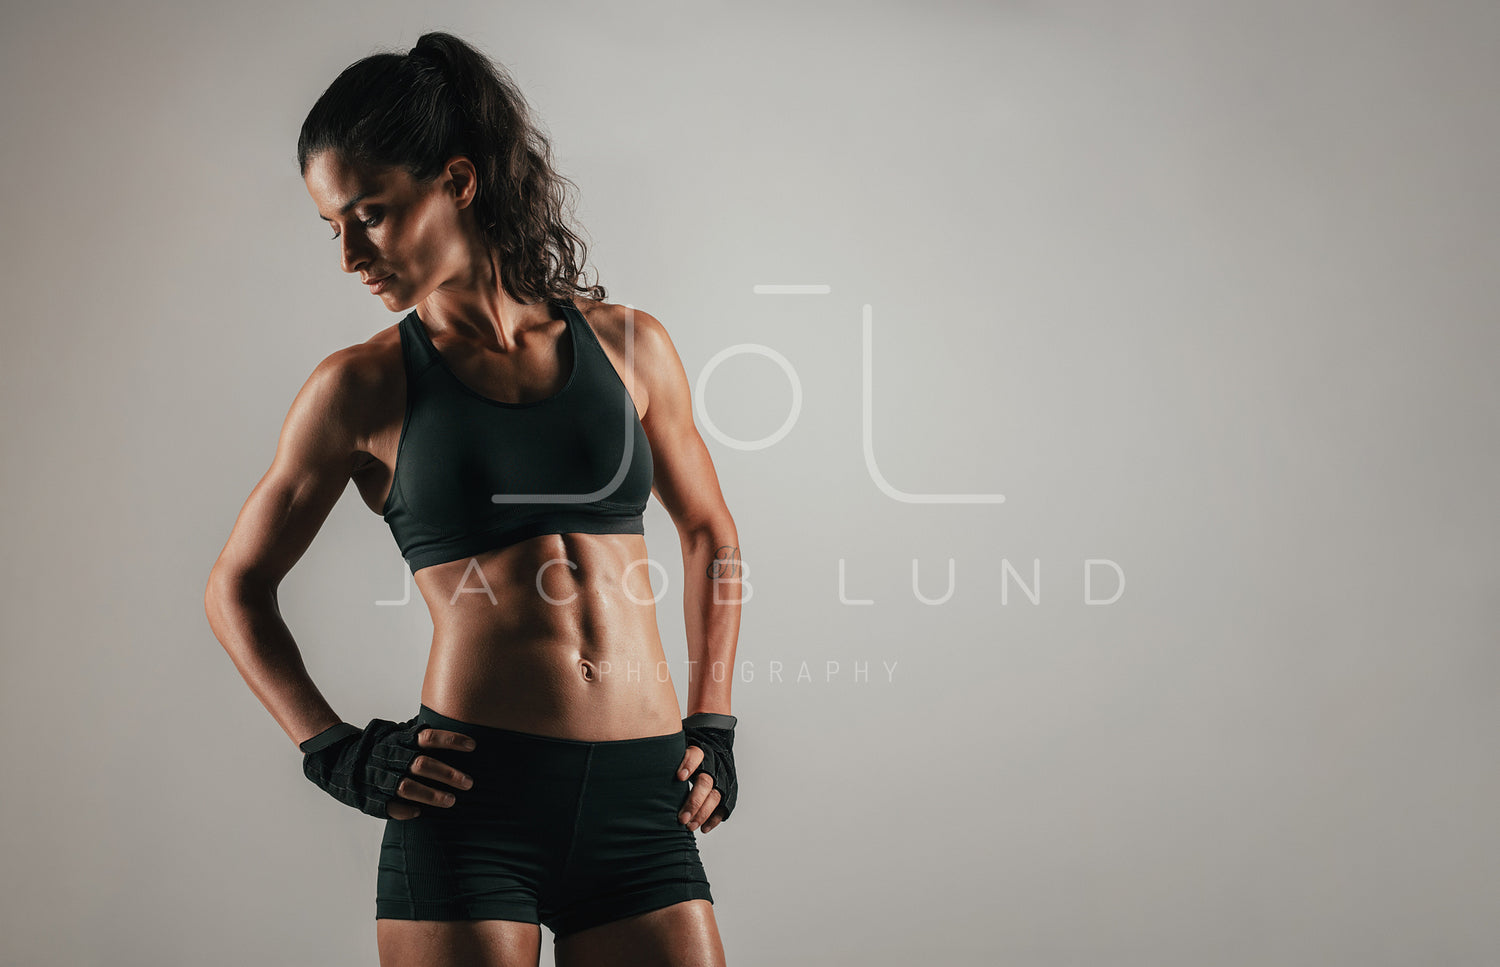 Fit Woman in Sports Bra and Shorts Stock Photo - Image of weight